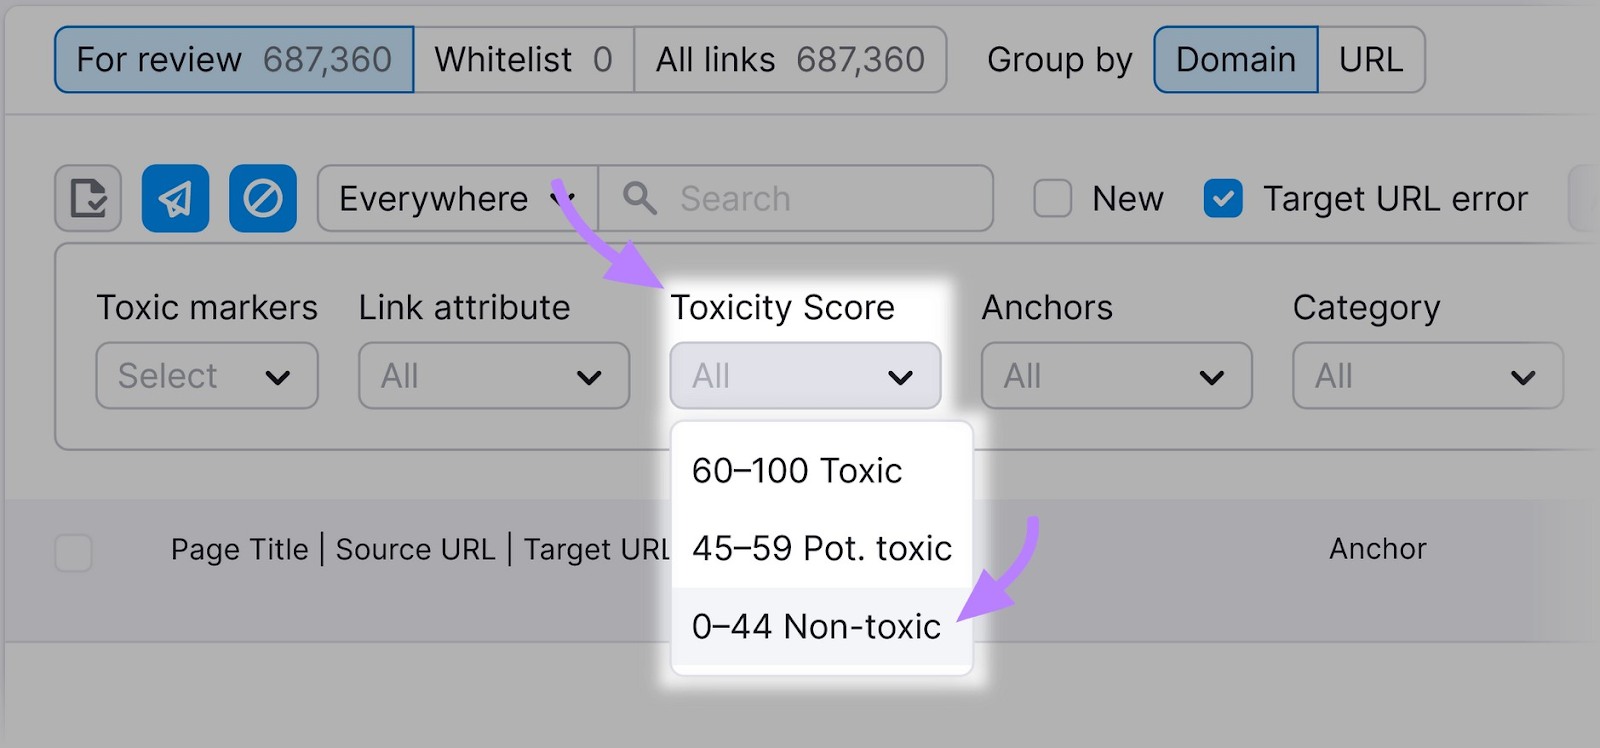 “Toxicity Score” filter with a drop down menu to choose from